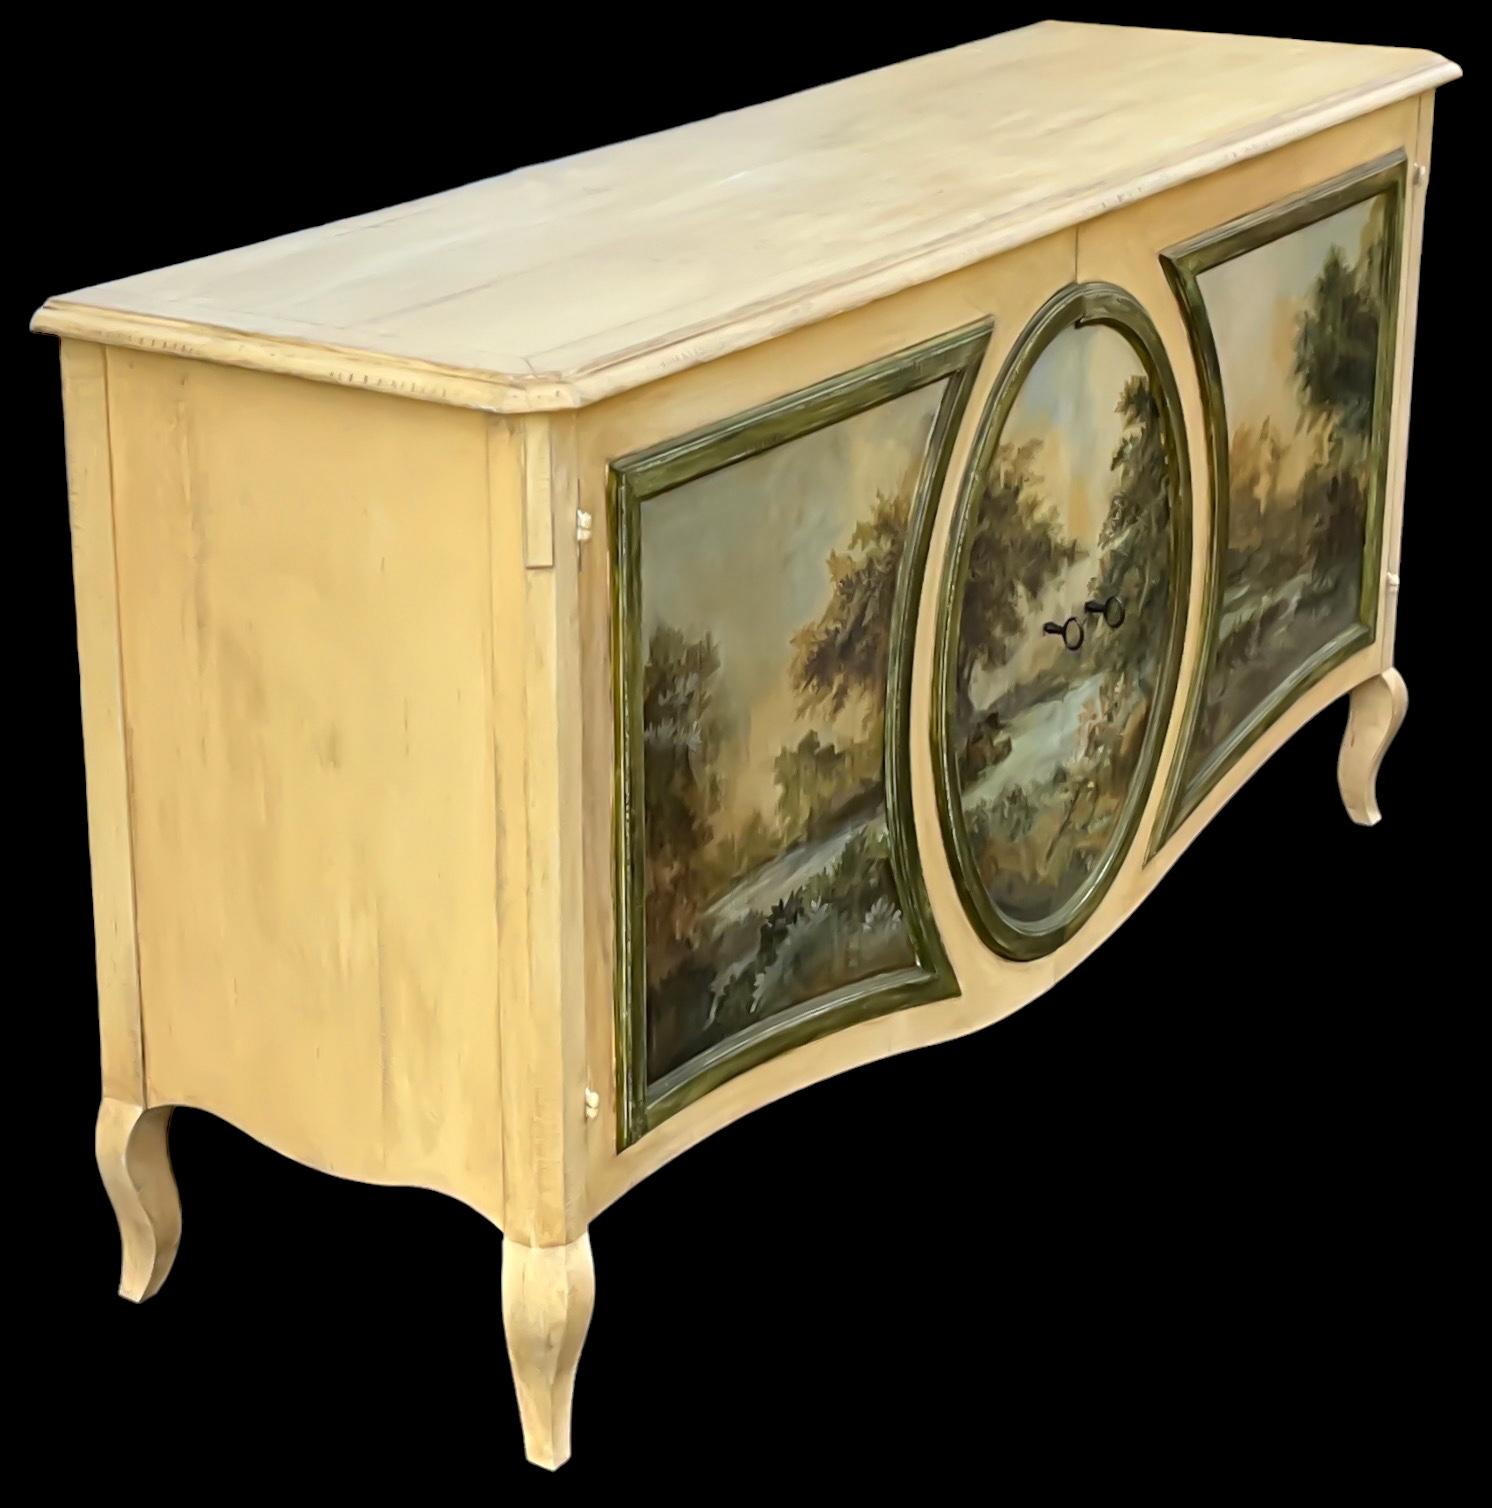 Aesthetic Movement 20th-C. French Hand Painted Cabinet / Server / Buffet/ Sideboard By Grange 